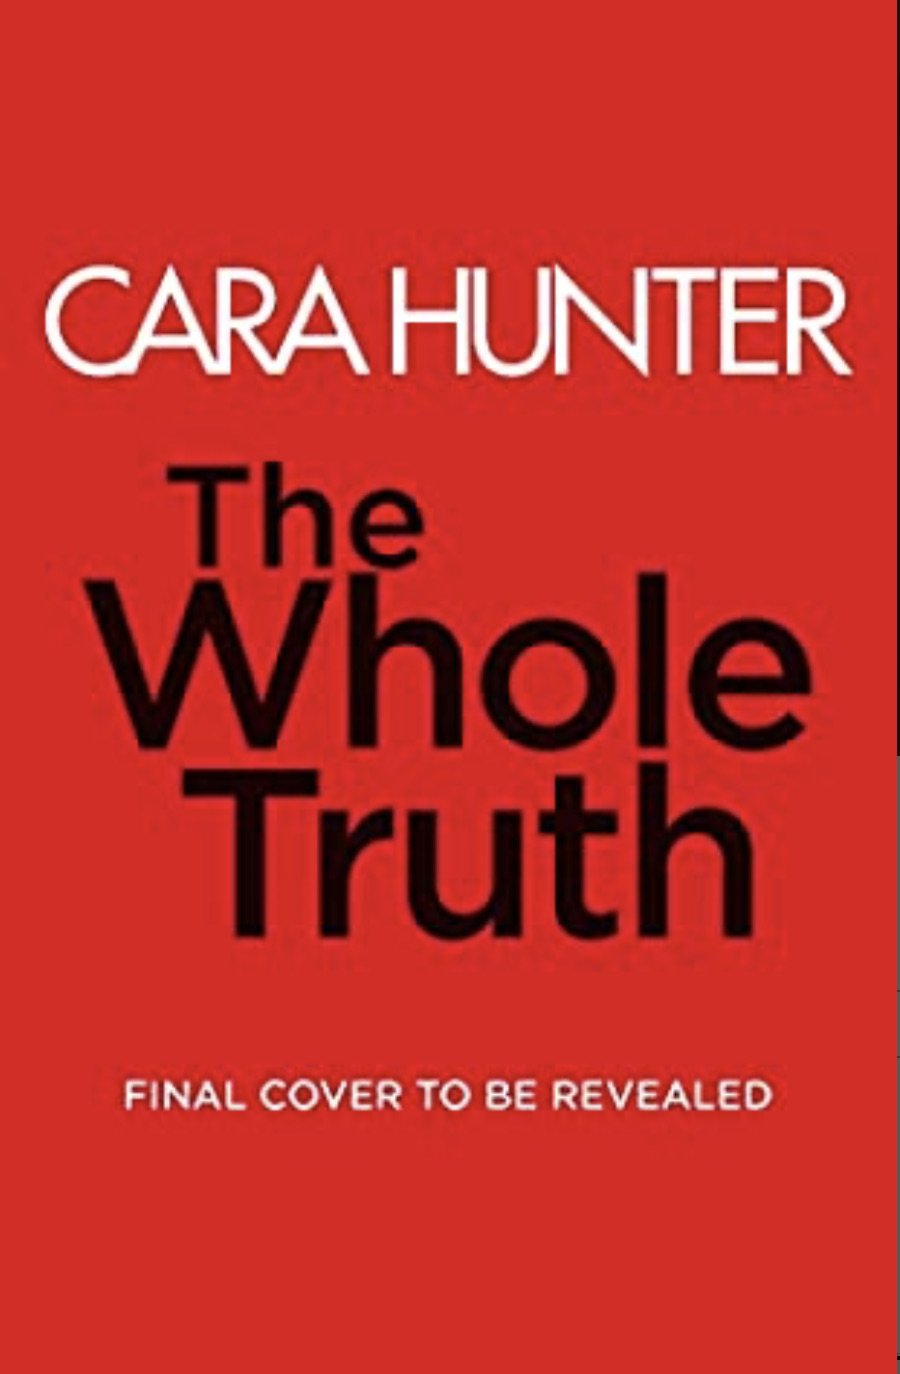 THE WHOLE TRUTH BY CARA HUNTER – BOOK REVIEW